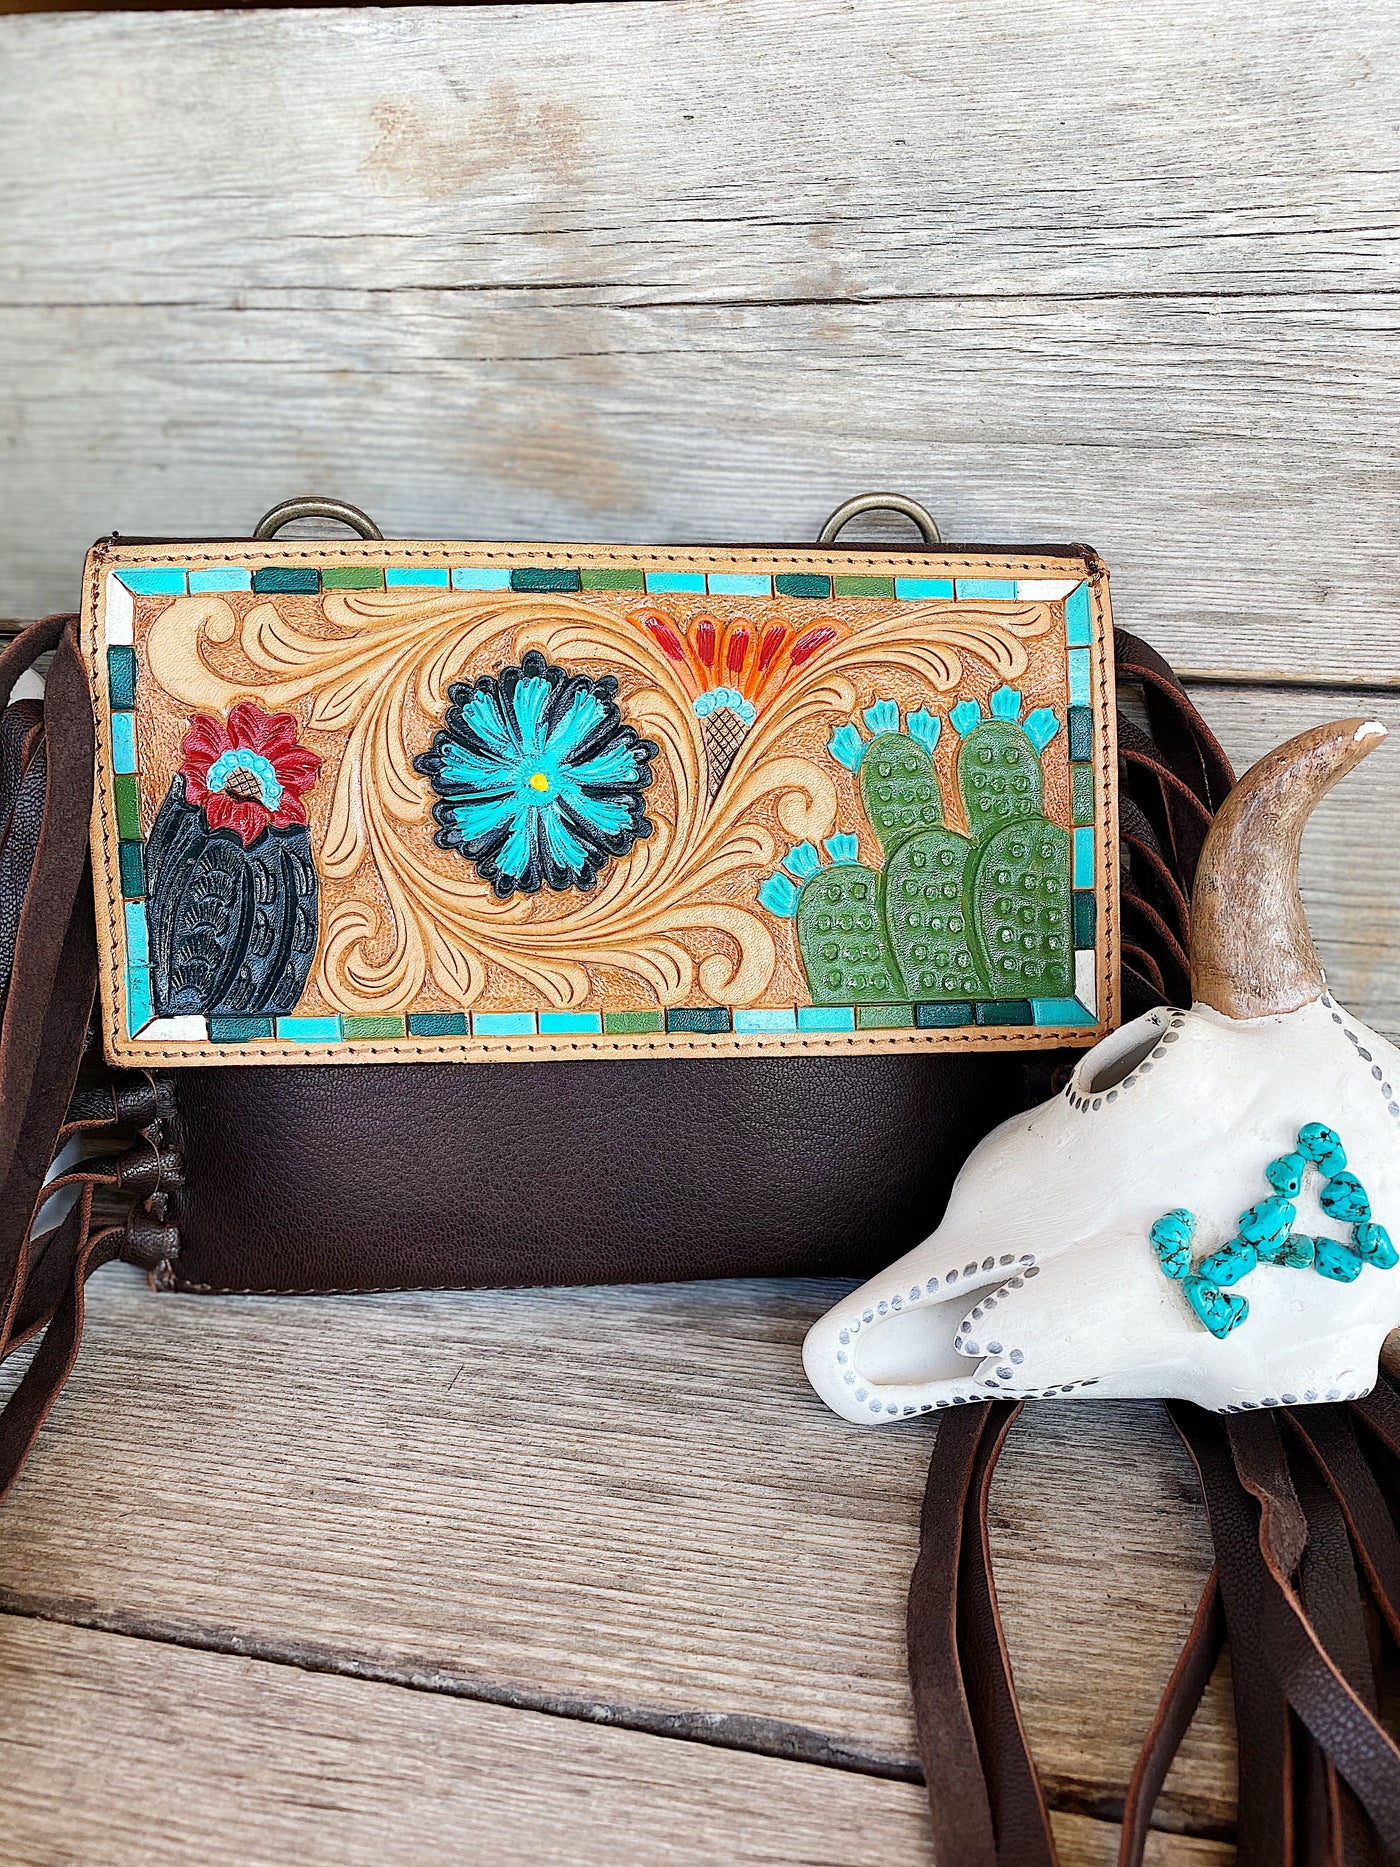 The Desert Gypsy Leather Purse